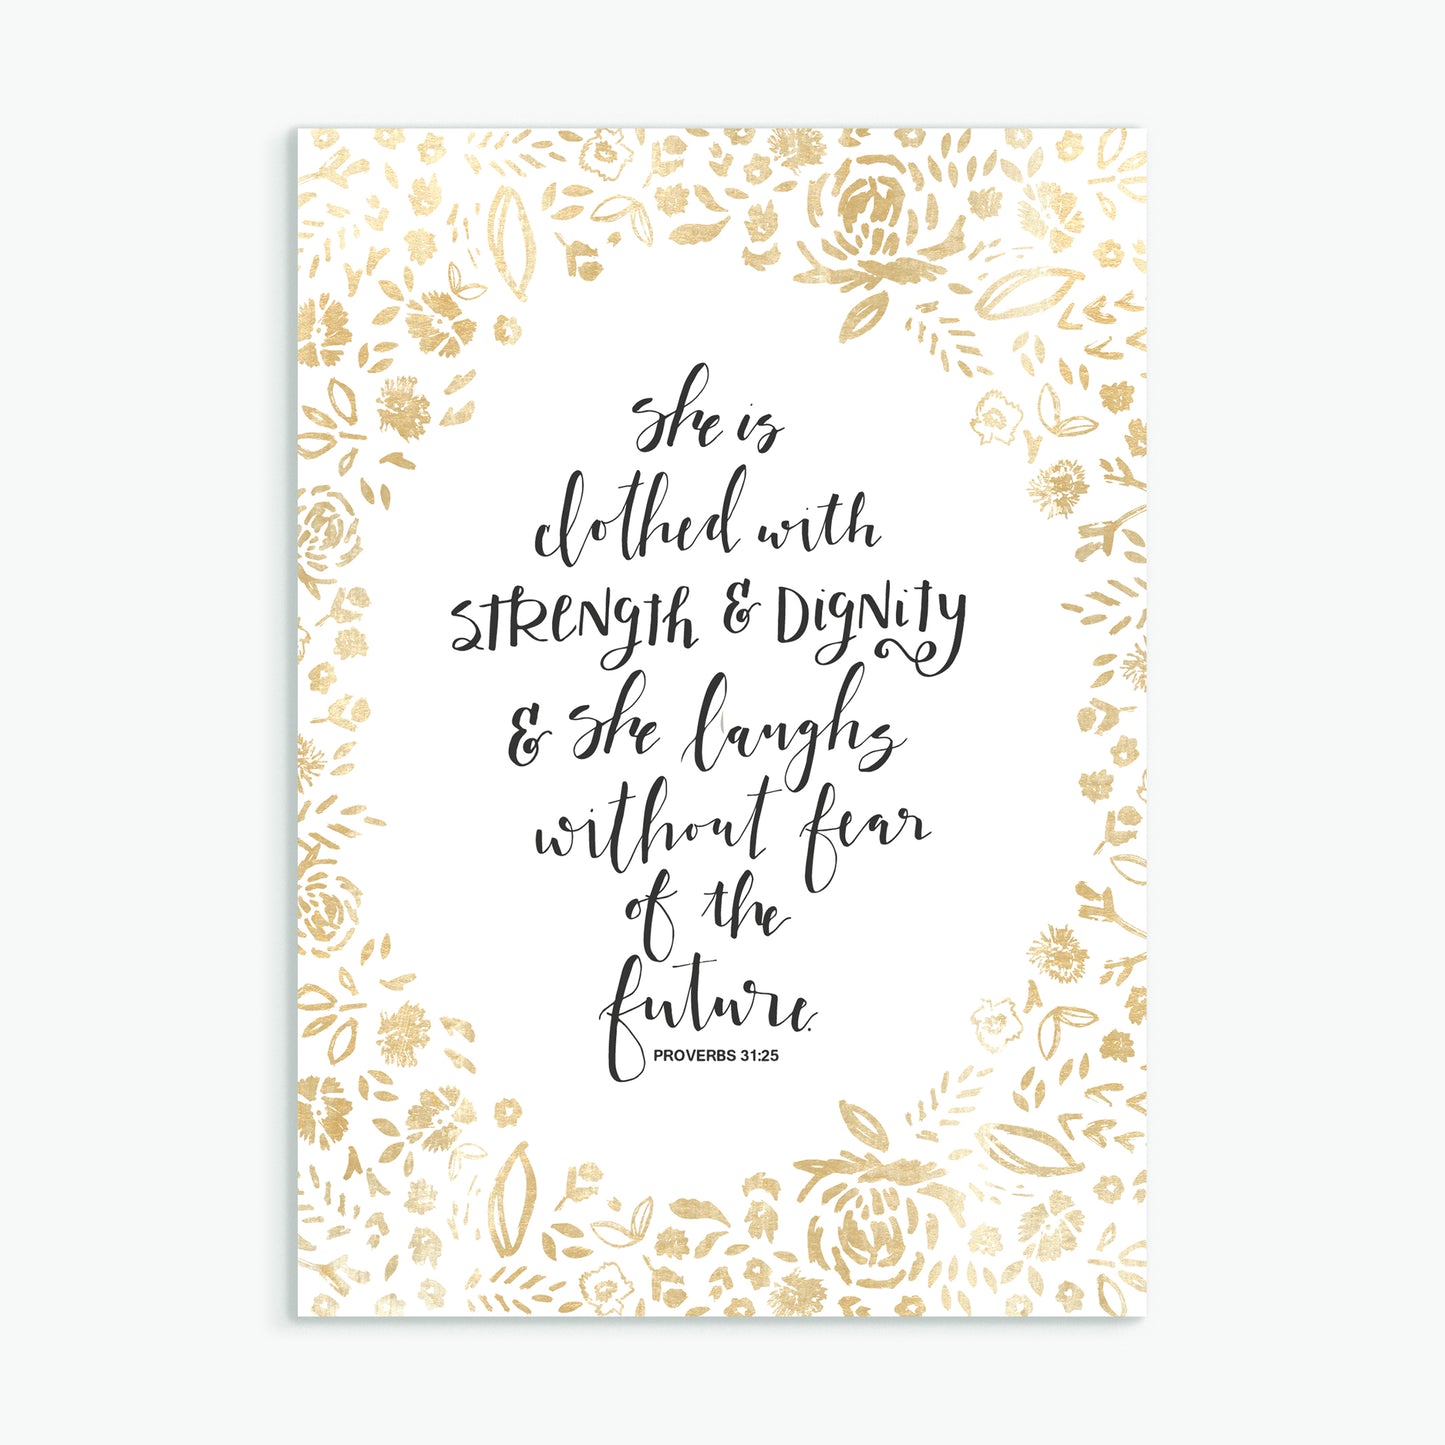 'She is clothed with strength & dignity' (gold) - Greeting Card